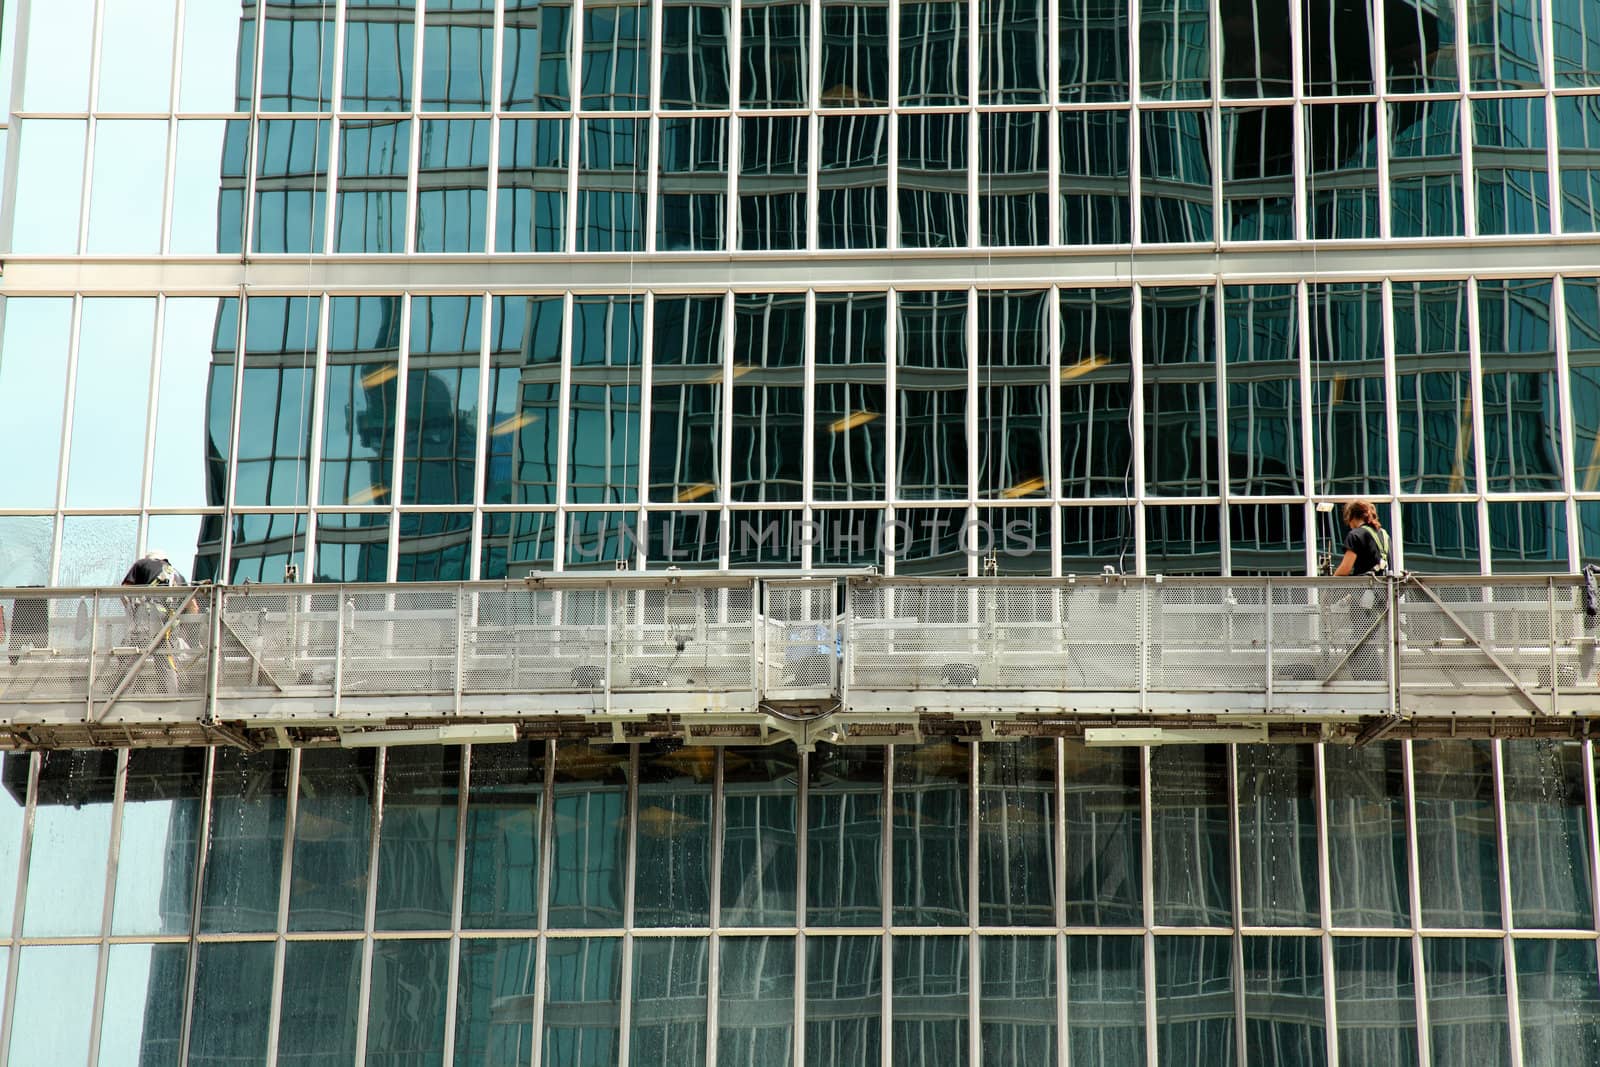 window washer cleaning windows on a modern highrise office tower building in the city